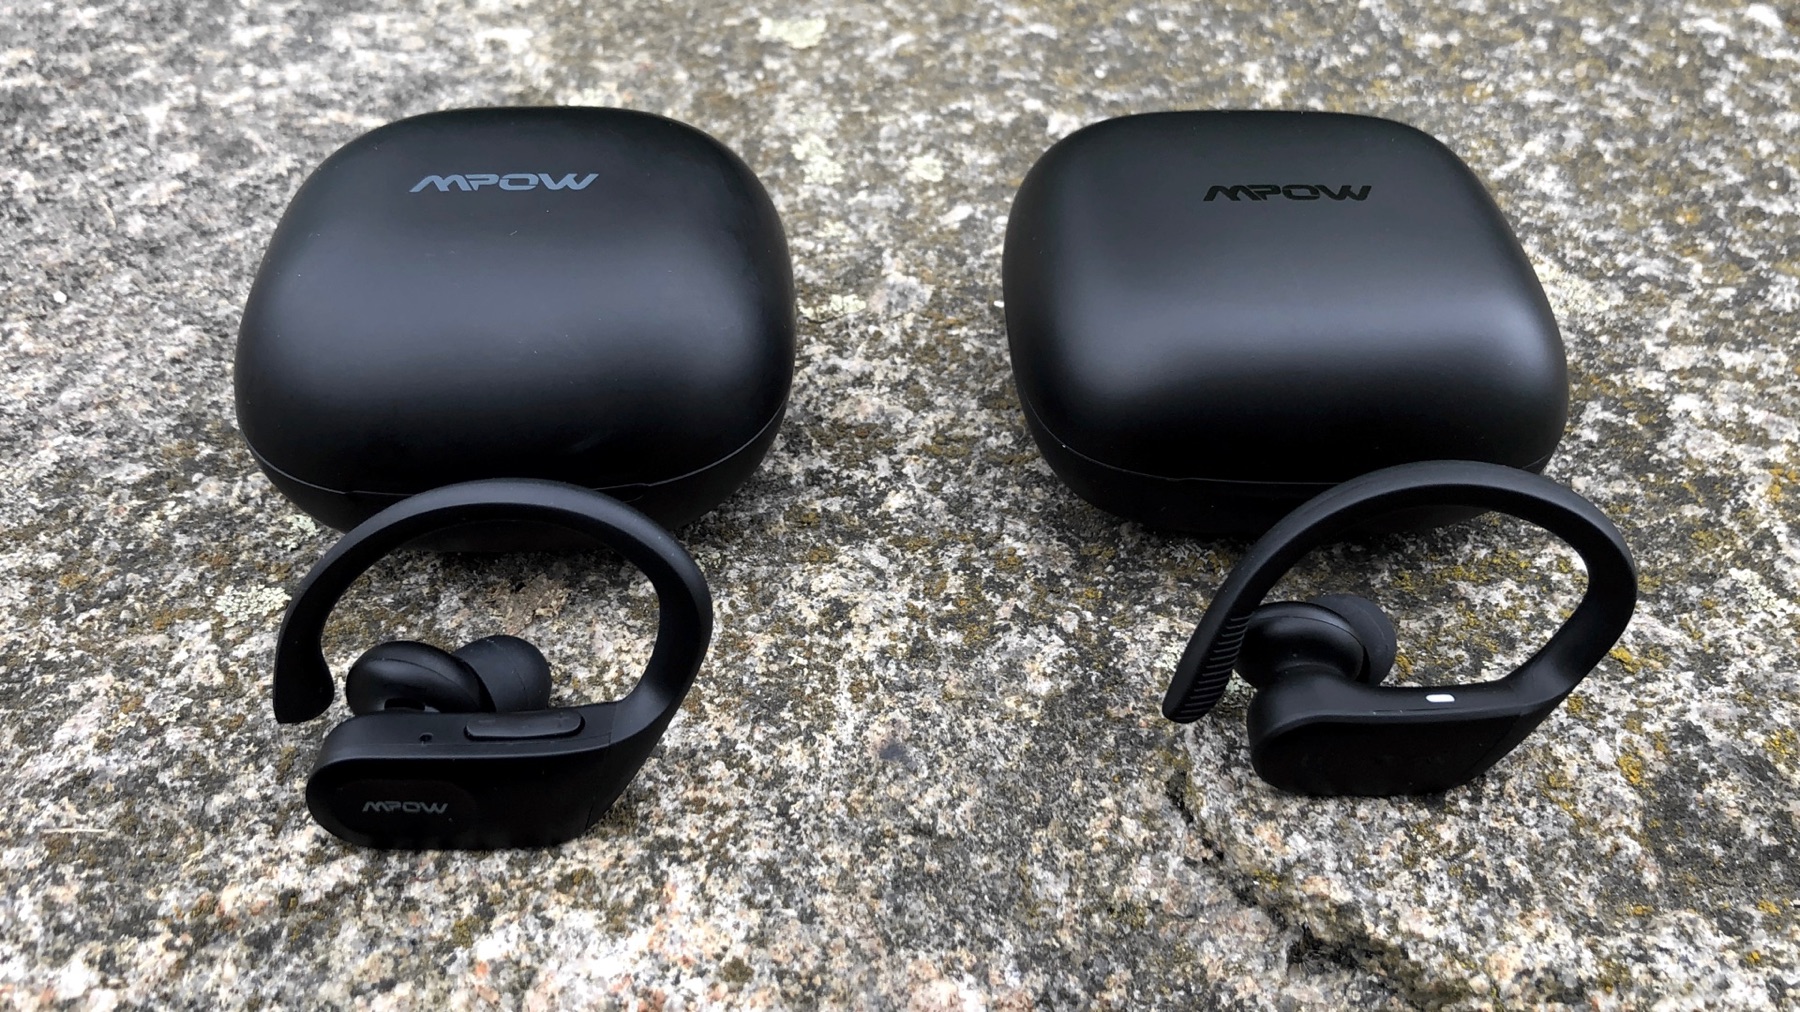 Scarbir Audio on Twitter: "It's time to put the wireless sport #earbuds from @Mpow to the test! Mpow Flame Lite Flame Pro vs #Mpow M30 —&gt; https://t.co/KTBnTG5876 #sportearbuds #earphones #